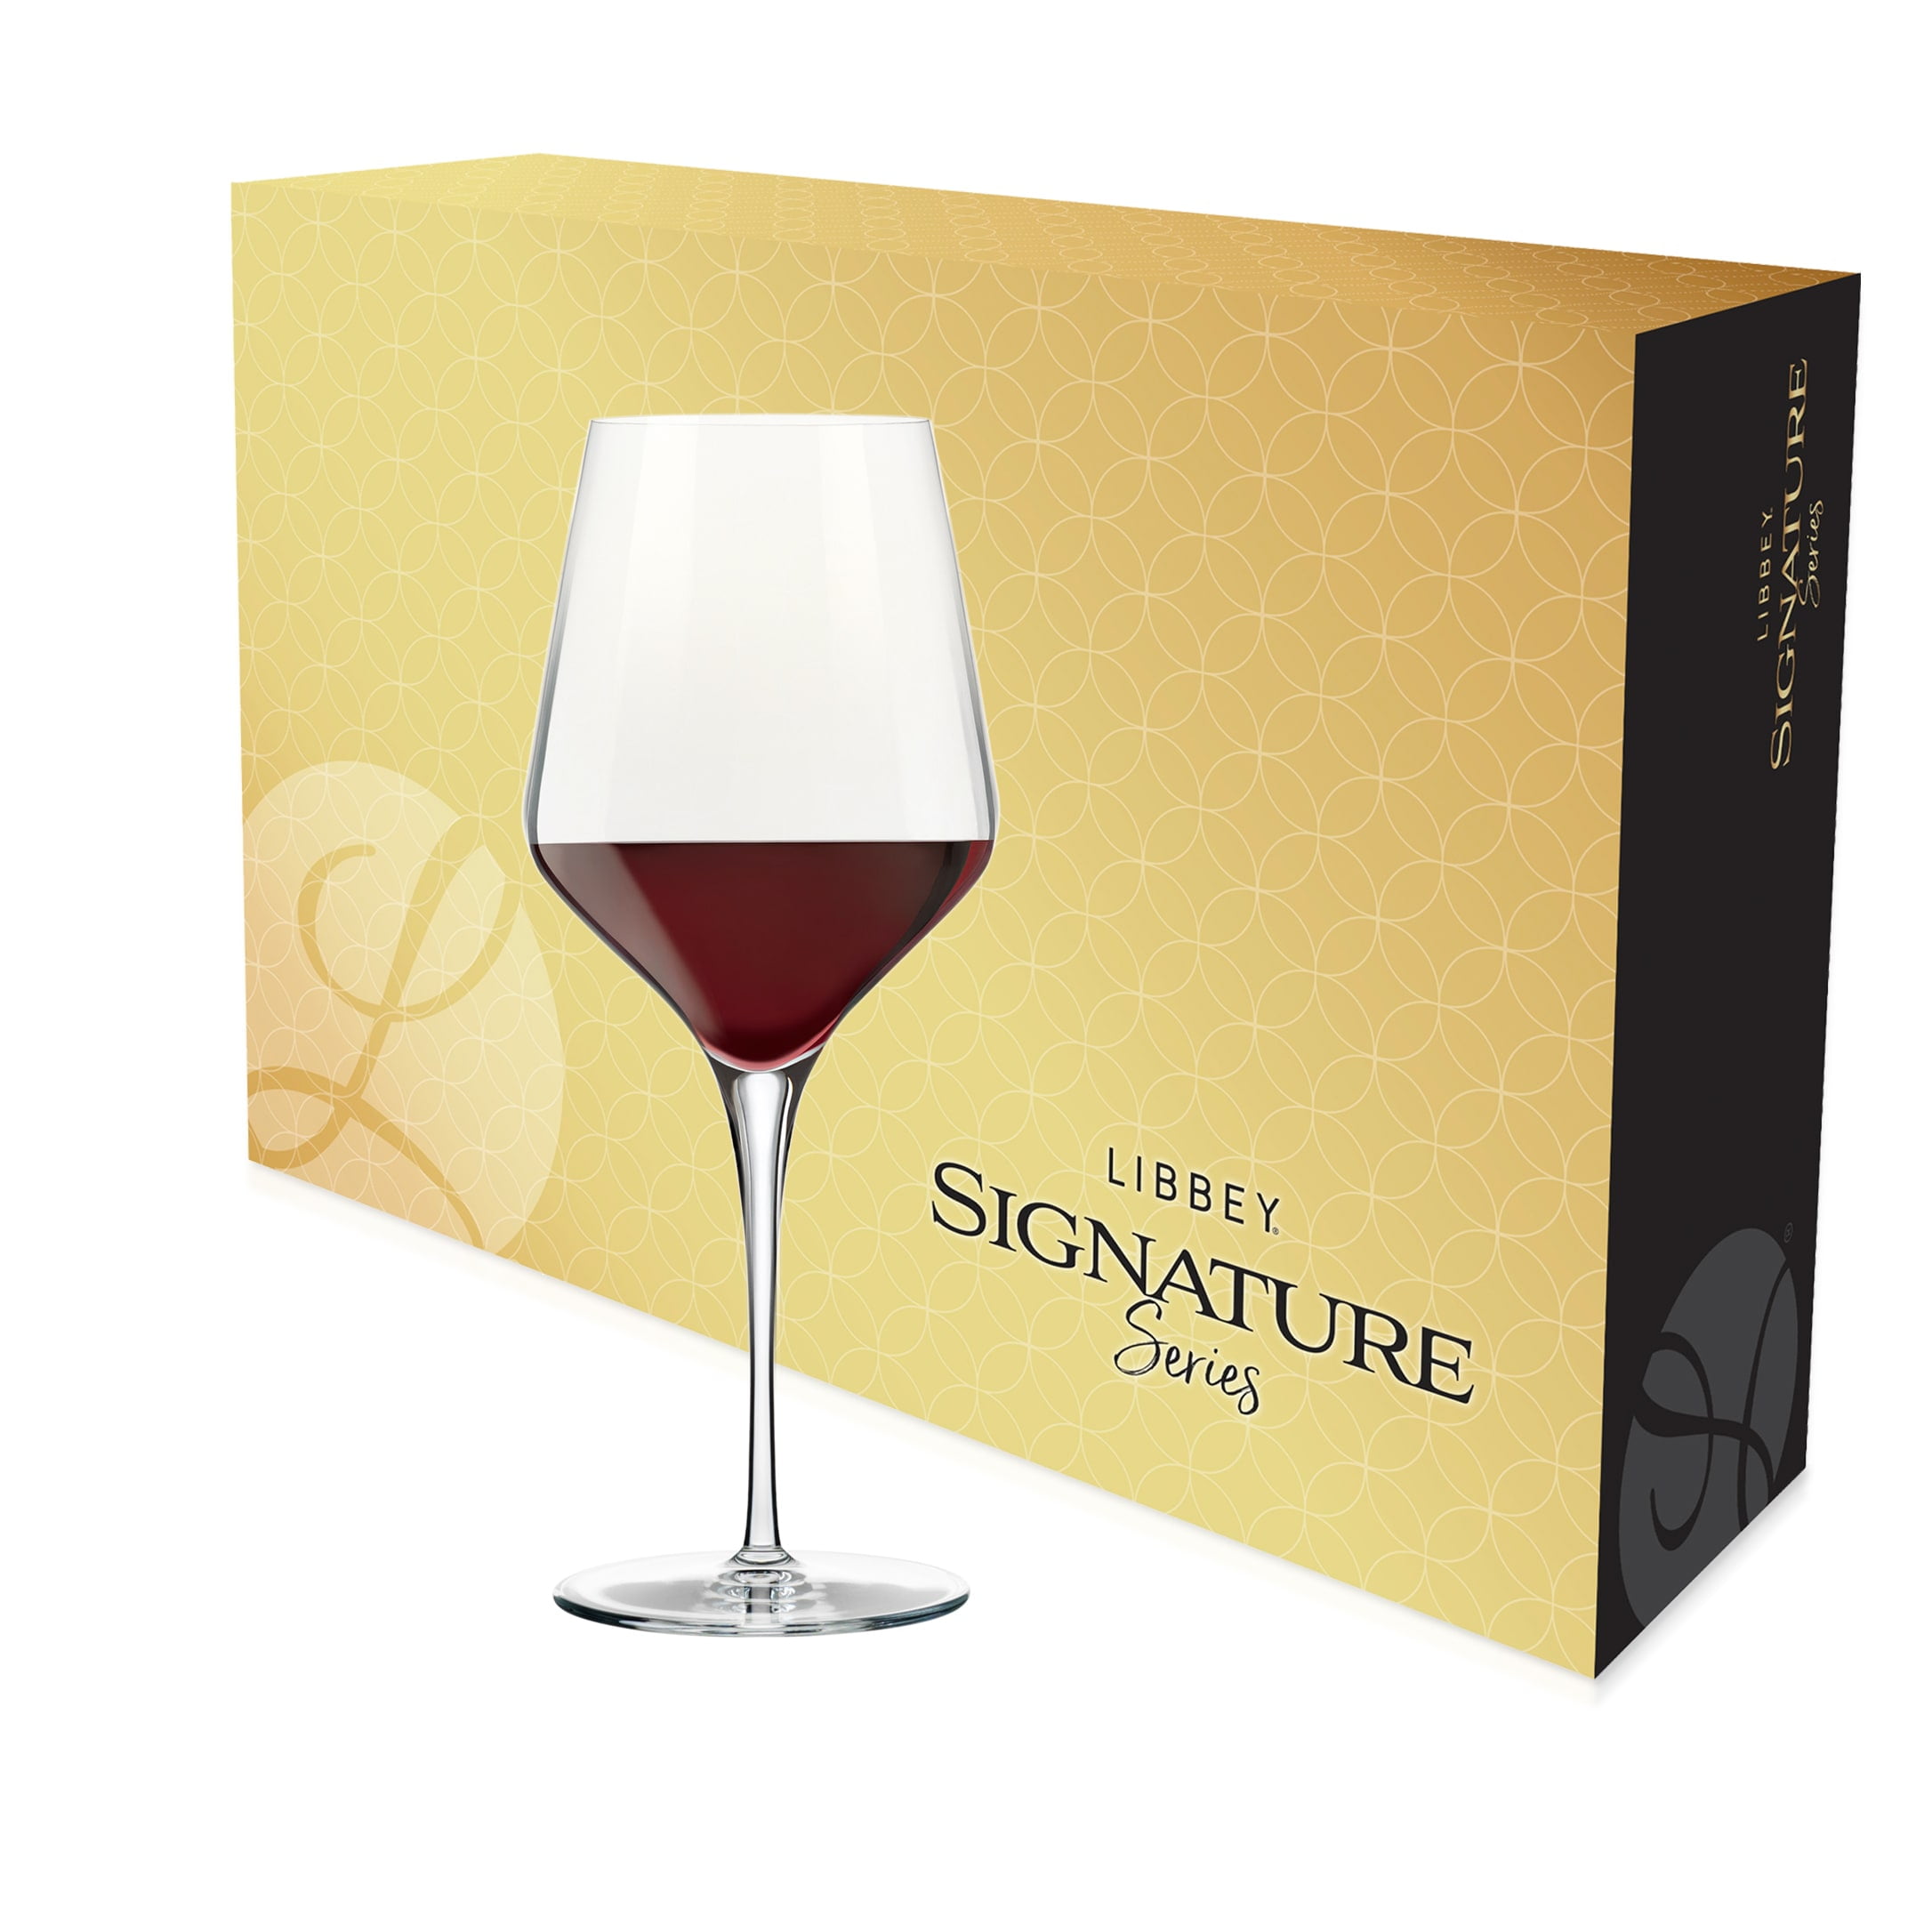 Libbey Signature Greenwich All-Purpose Wine Glass Gift Set of 4, 16-ounce